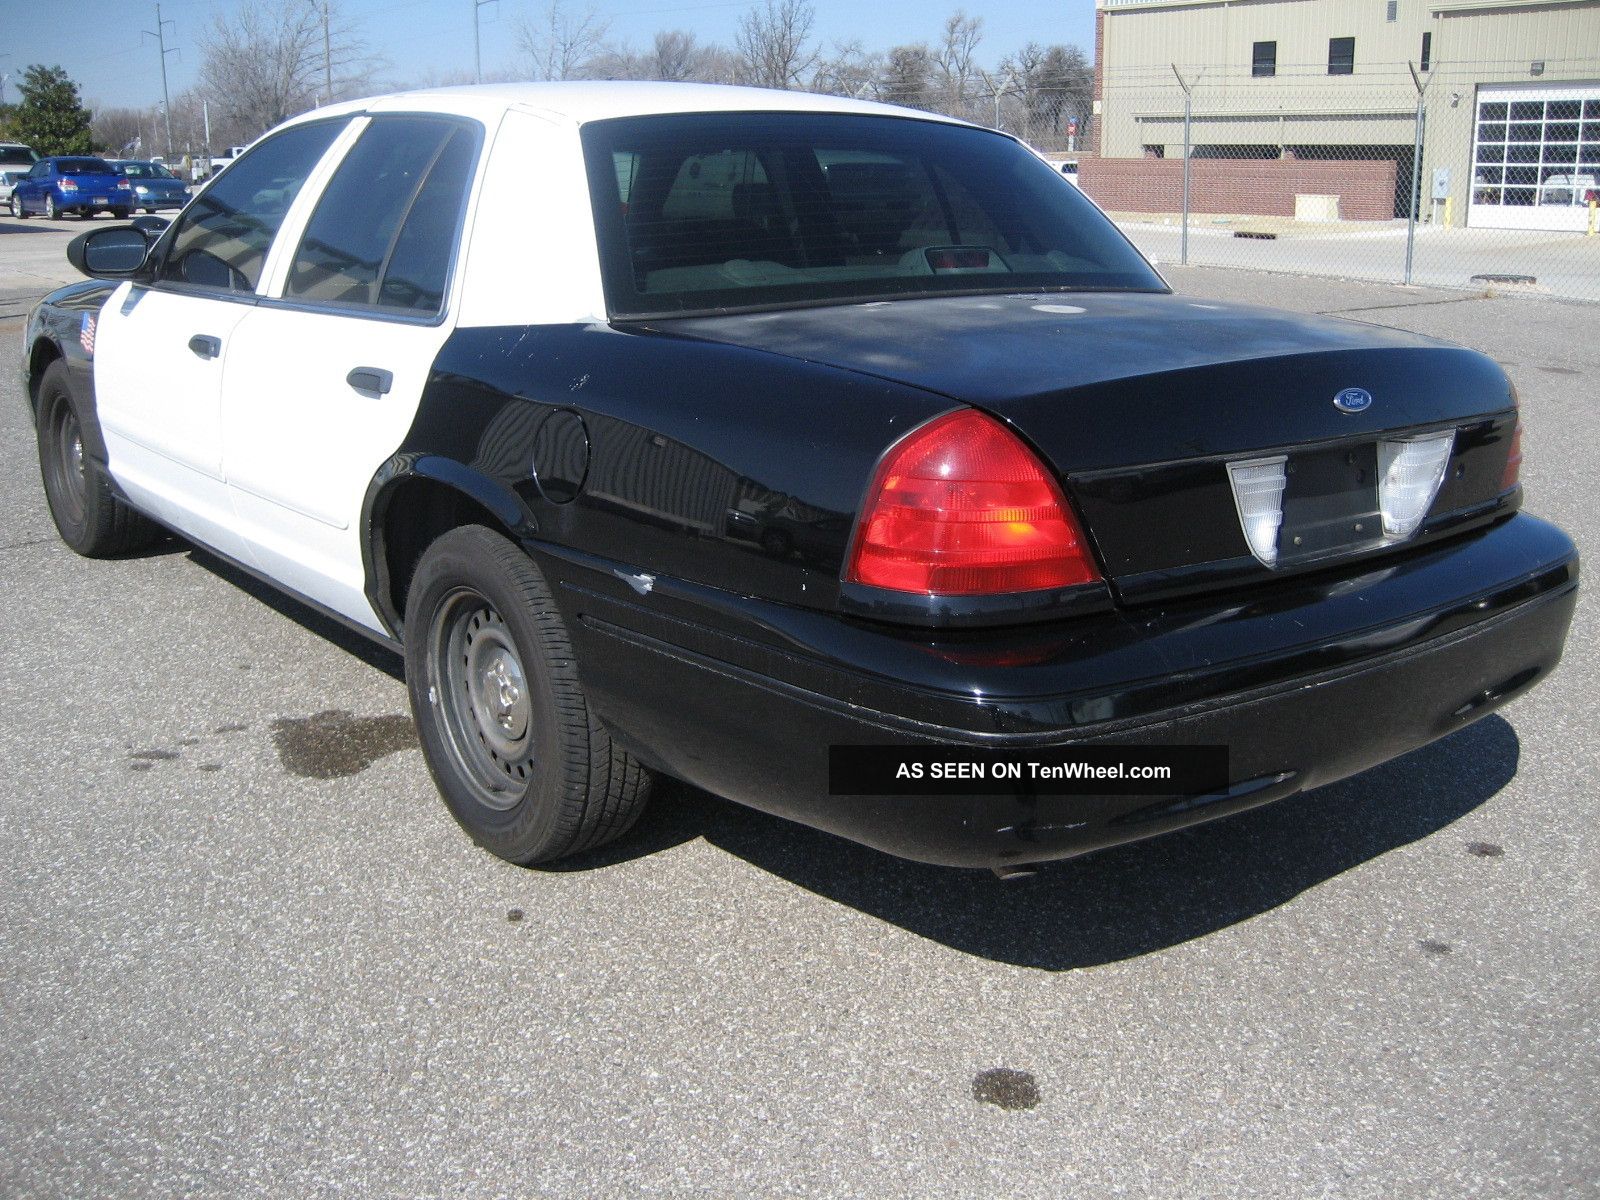 2002 Ford crown victoria police interceptor owners manual #8